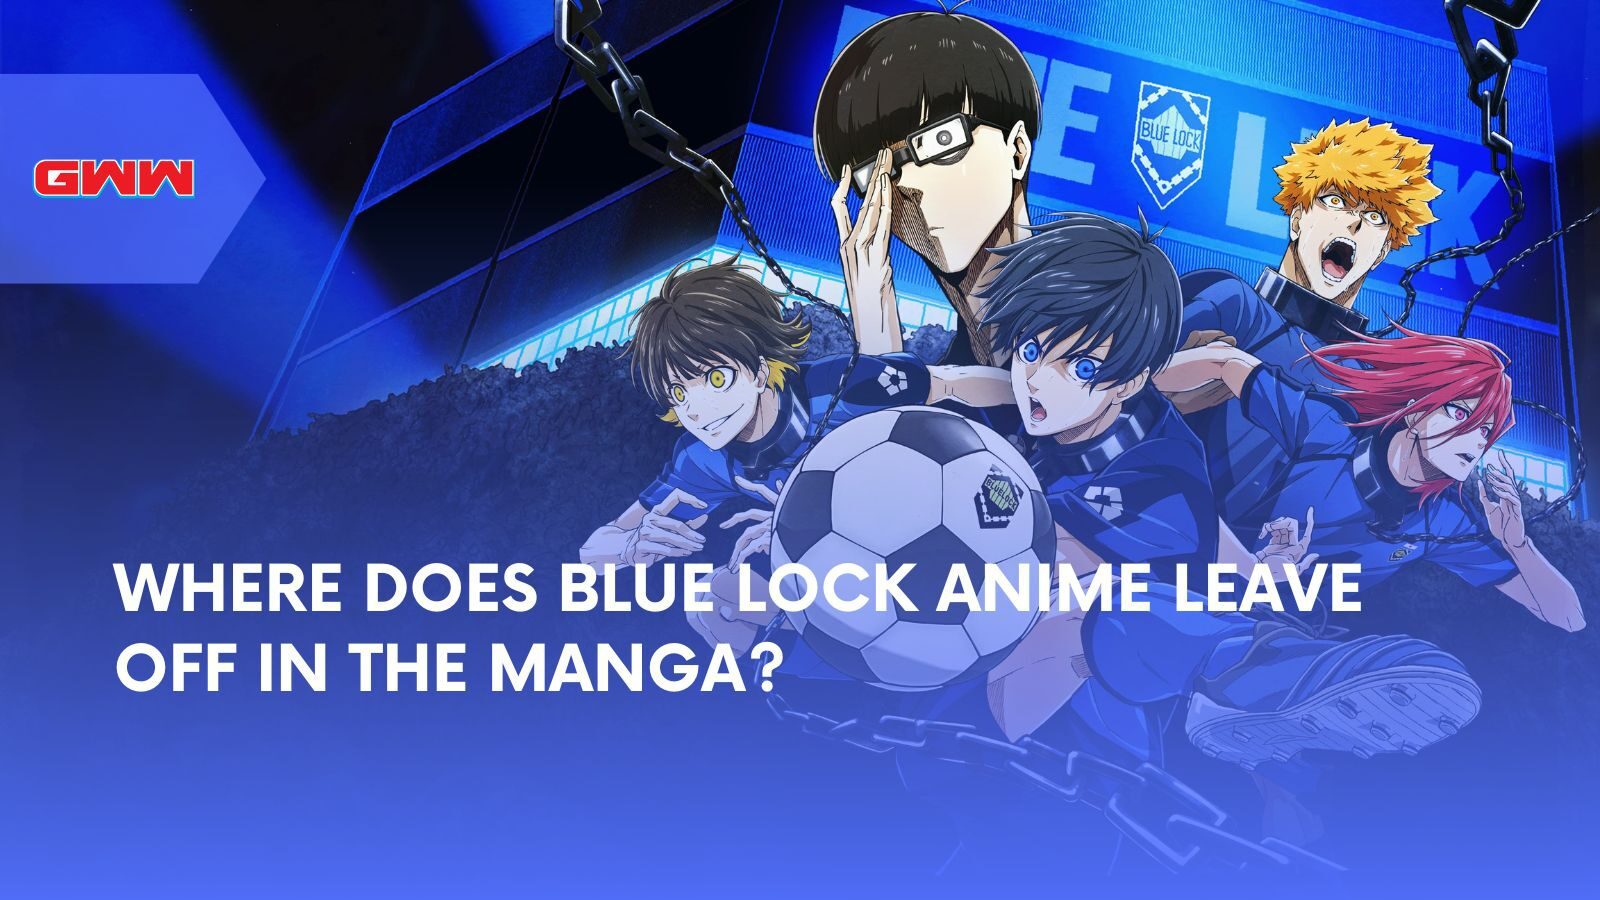 Where Does Blue Lock Anime Leave Off in the Manga?